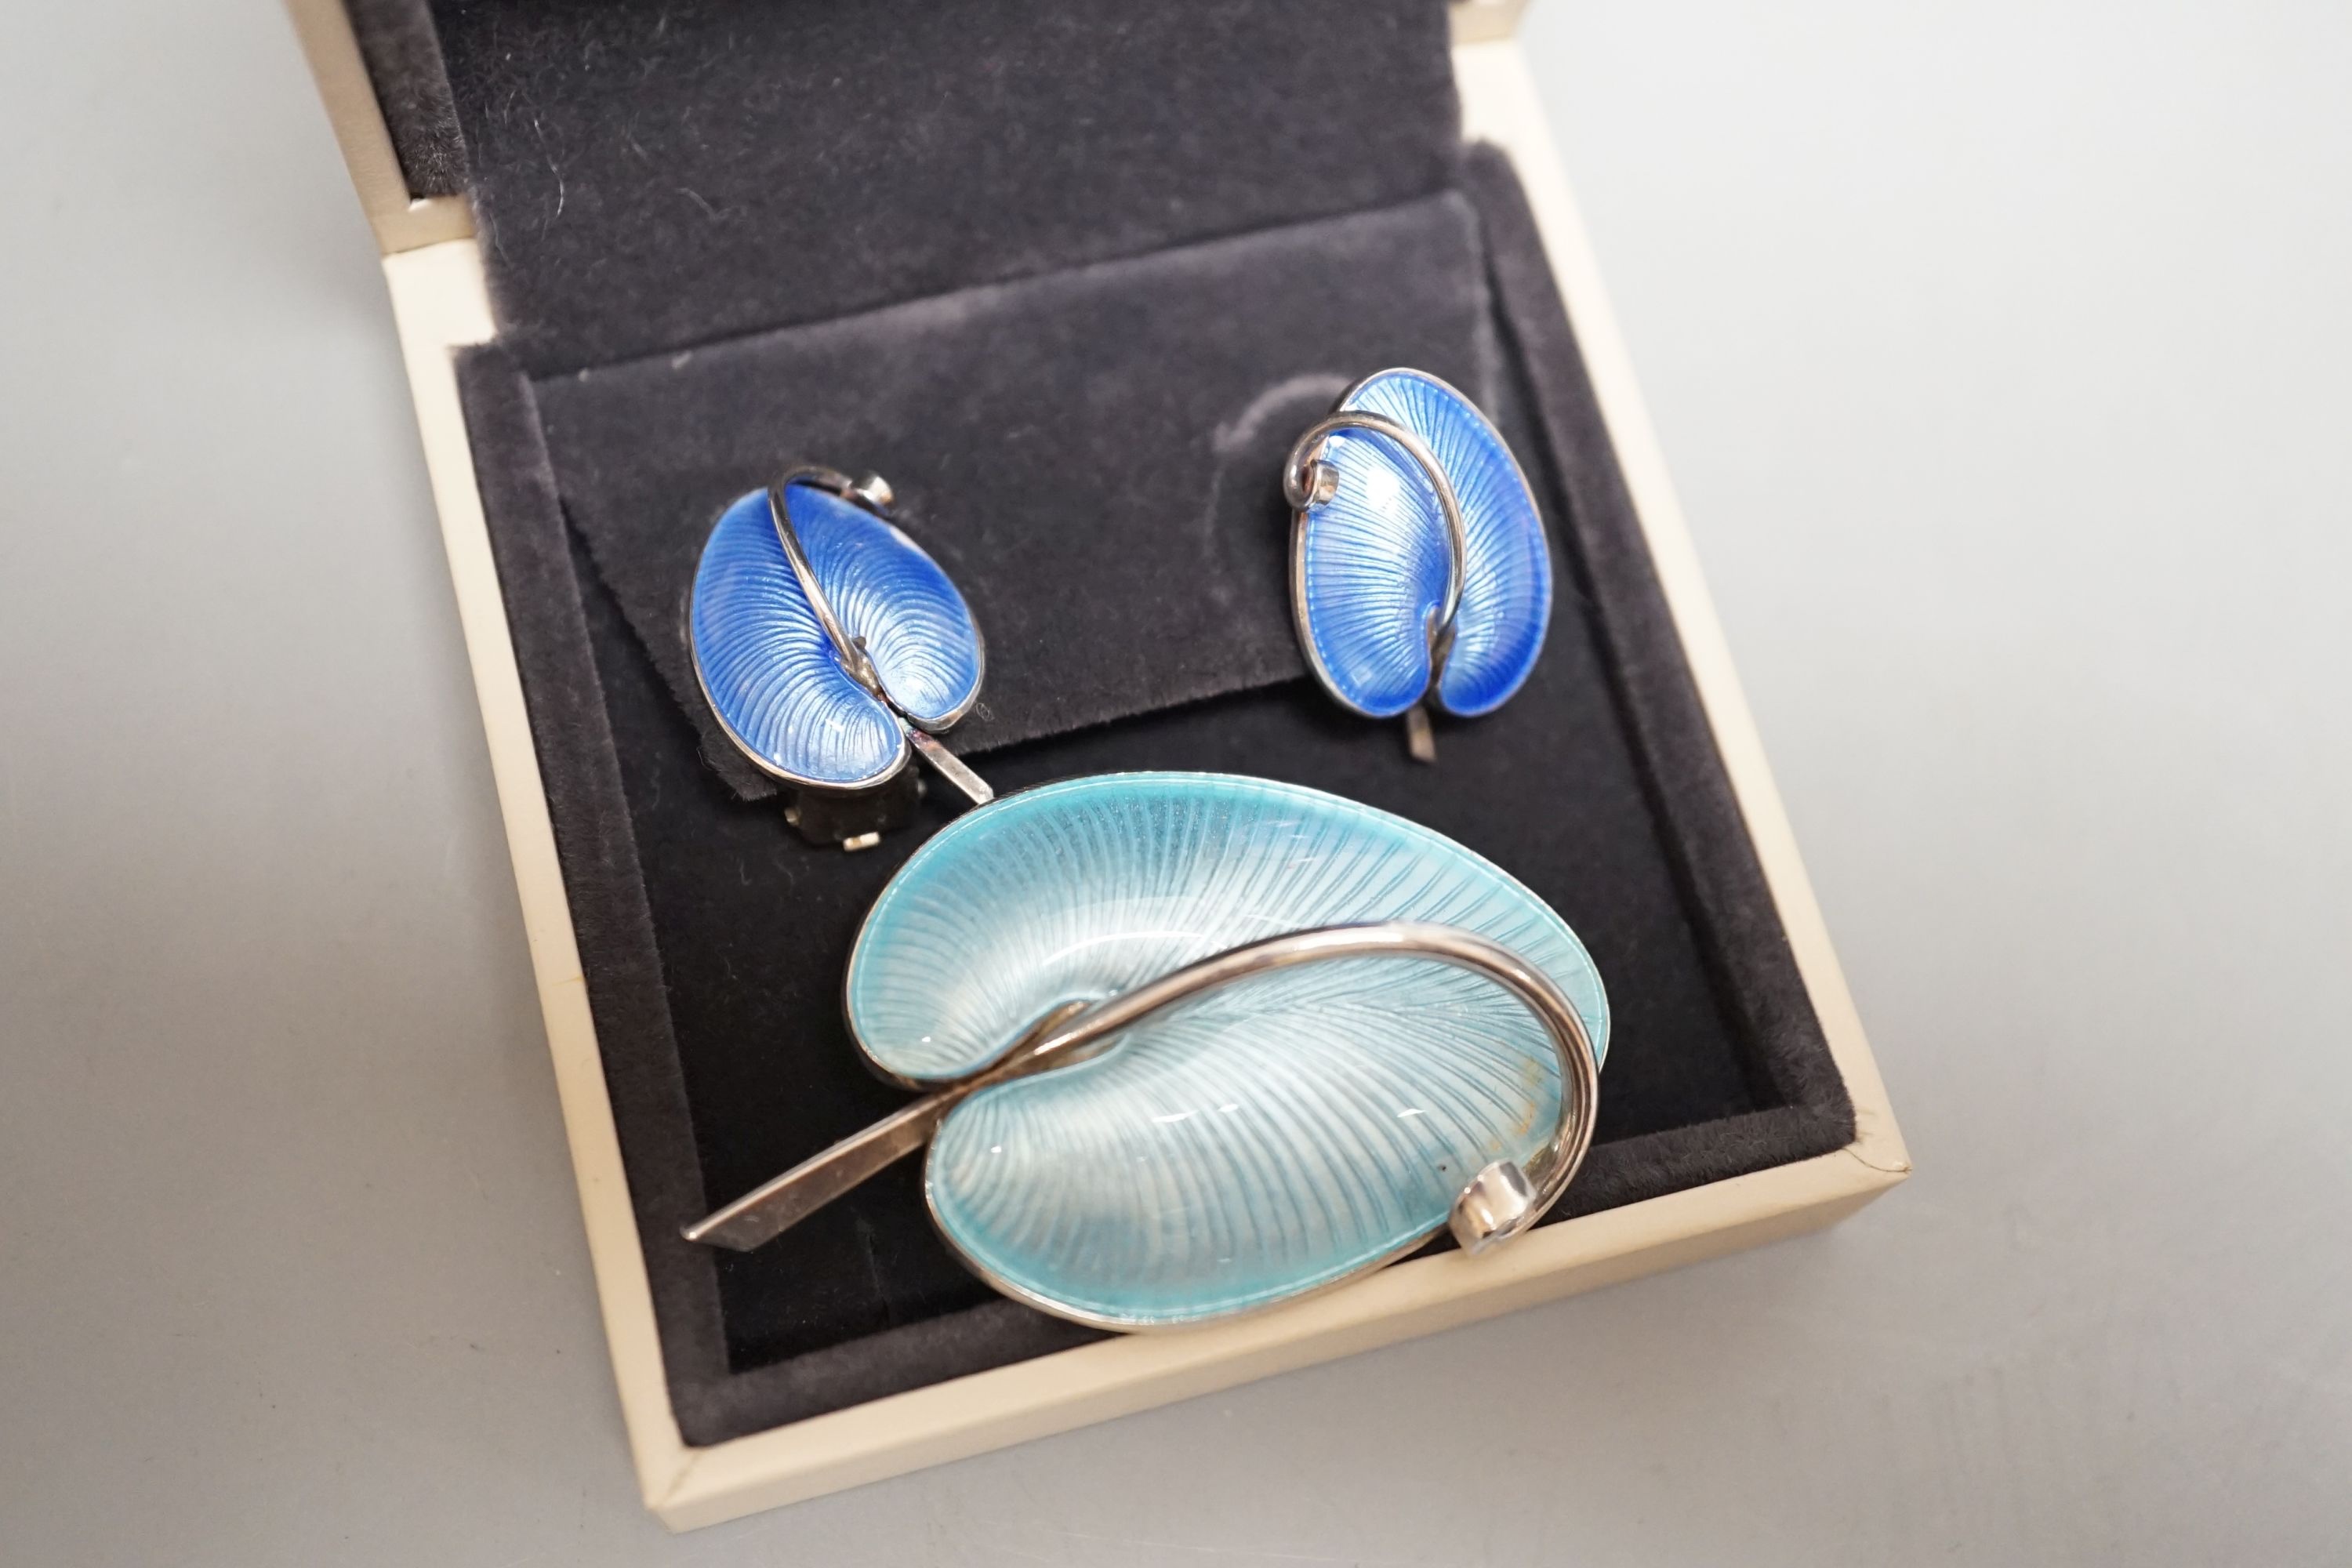 A pair of 20th century Danish sterling and enamel ear clips by Volmer Bahner & Co, 21mm and similar brooch, 47mm.